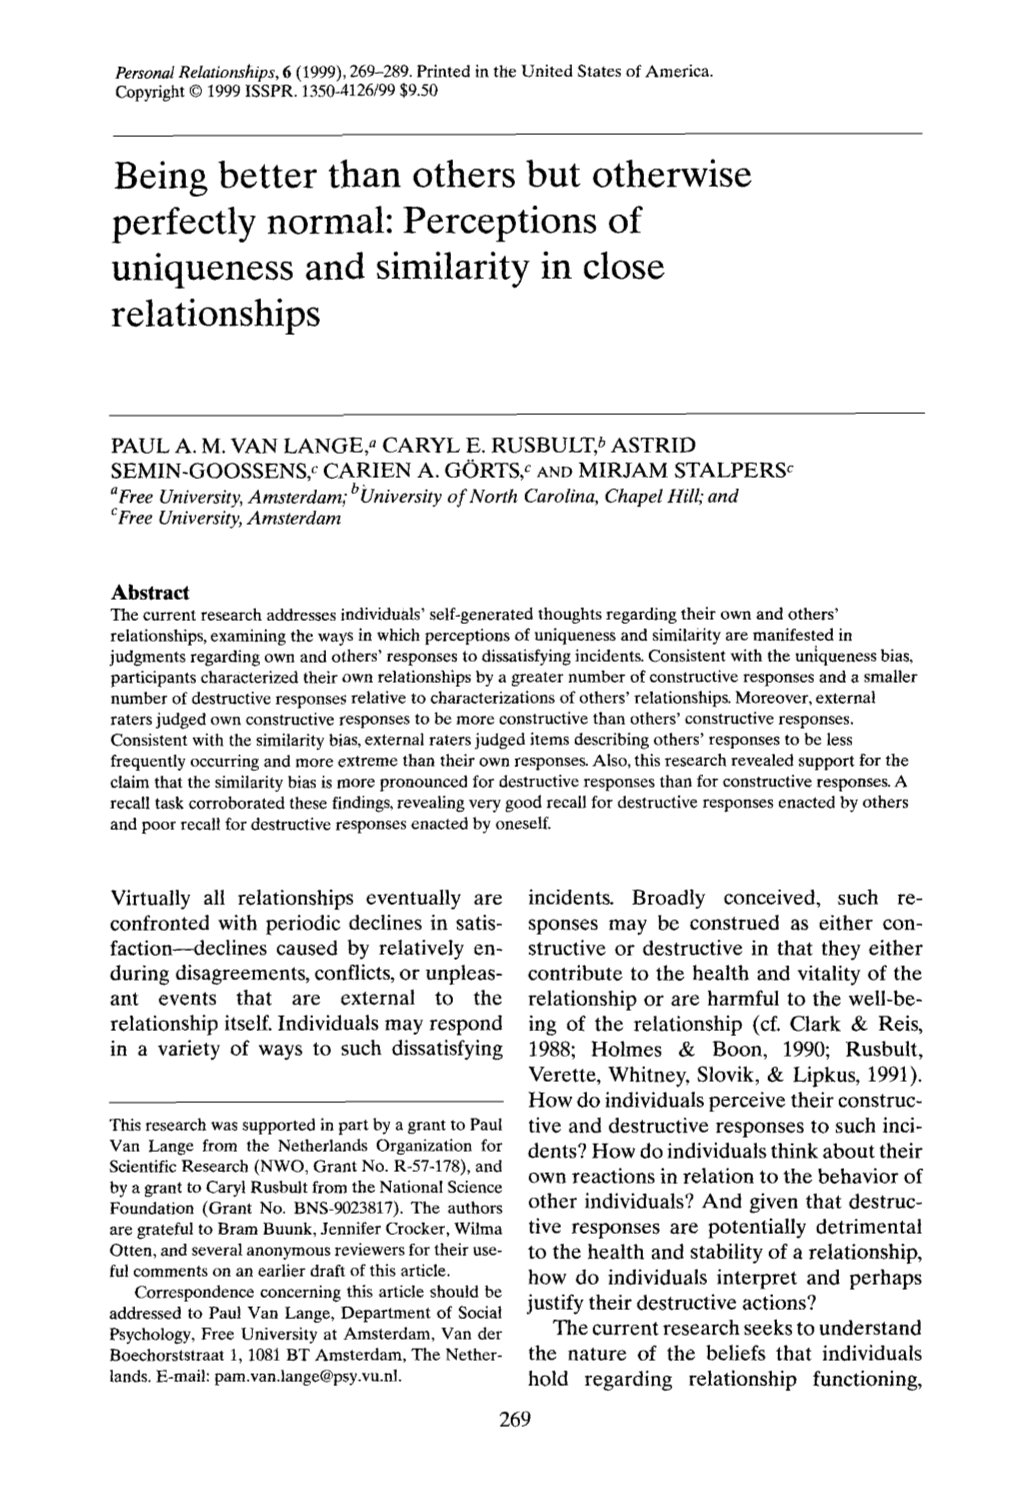 Perceptions of Uniqueness and Similarity in Close Relationships